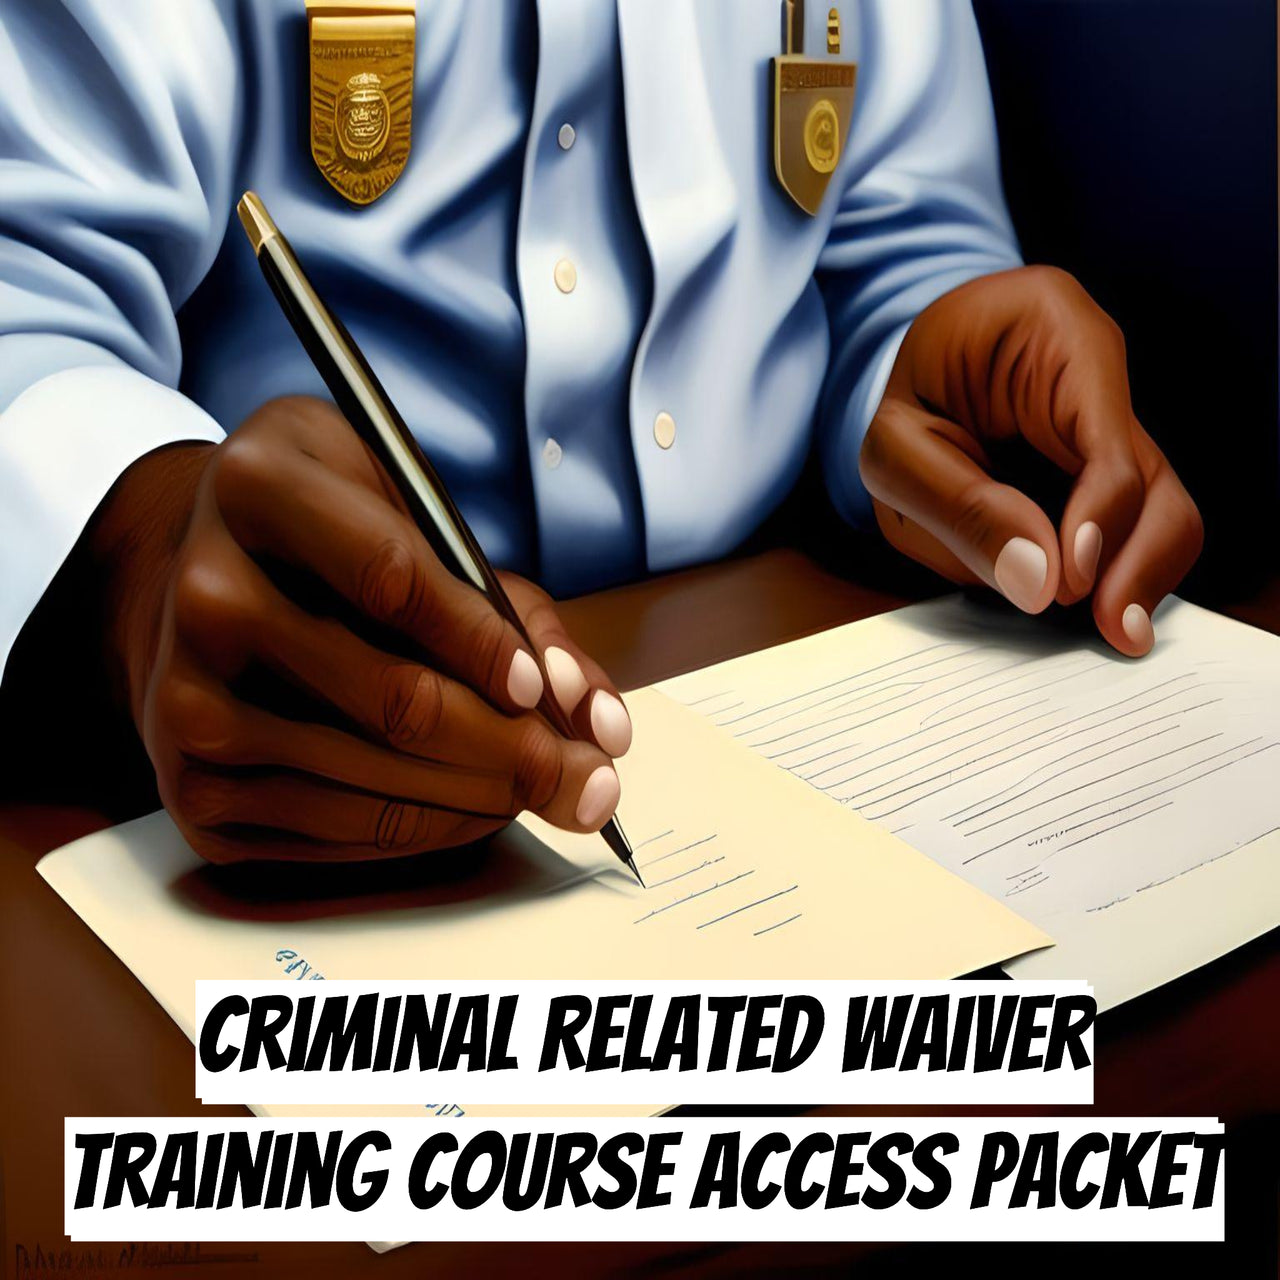 Criminal Related Waiver Training Course Access Packet